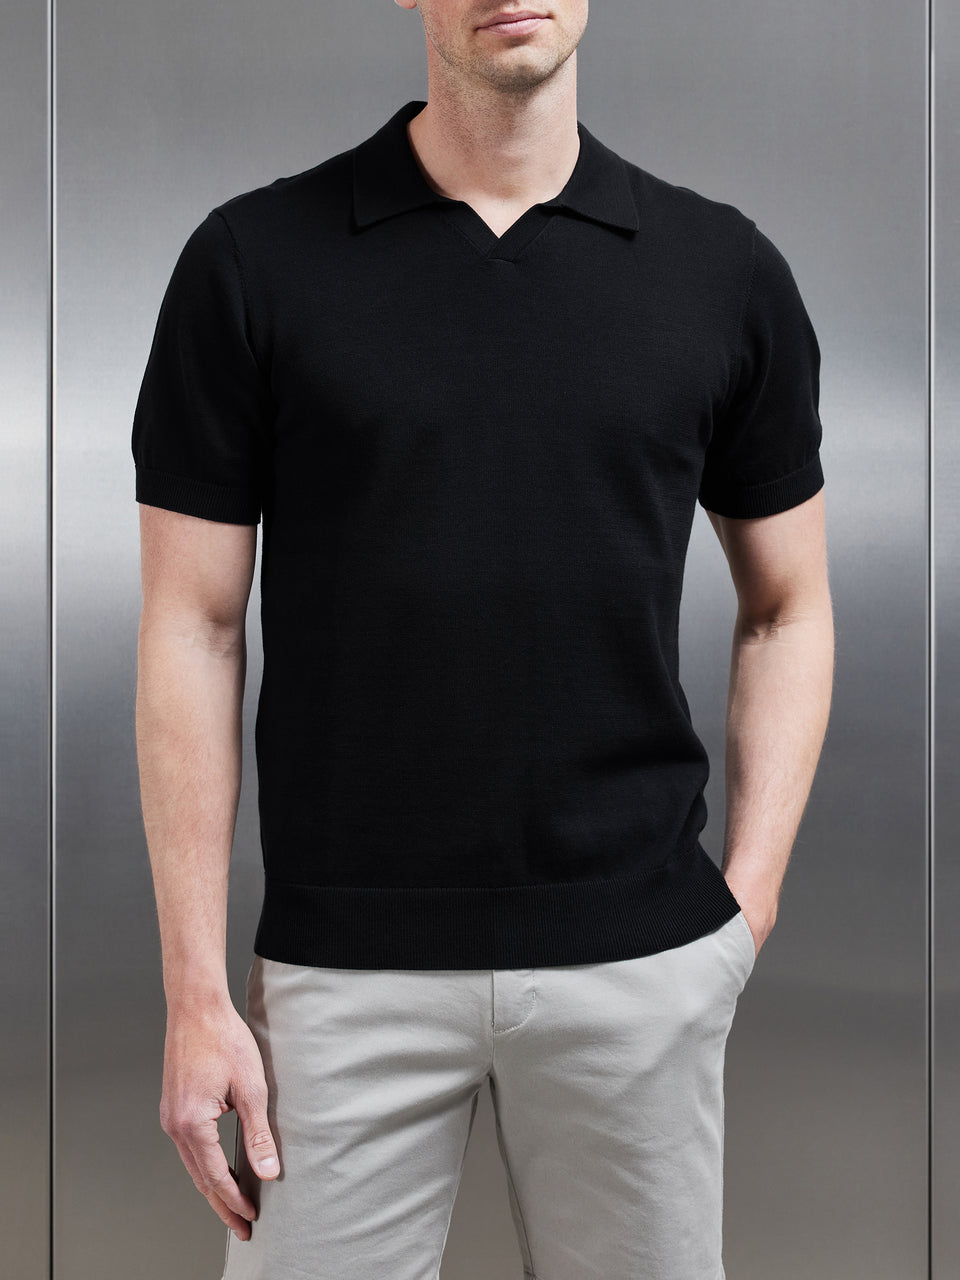 Cotton Knitted Revere Collar Polo Shirt in Black